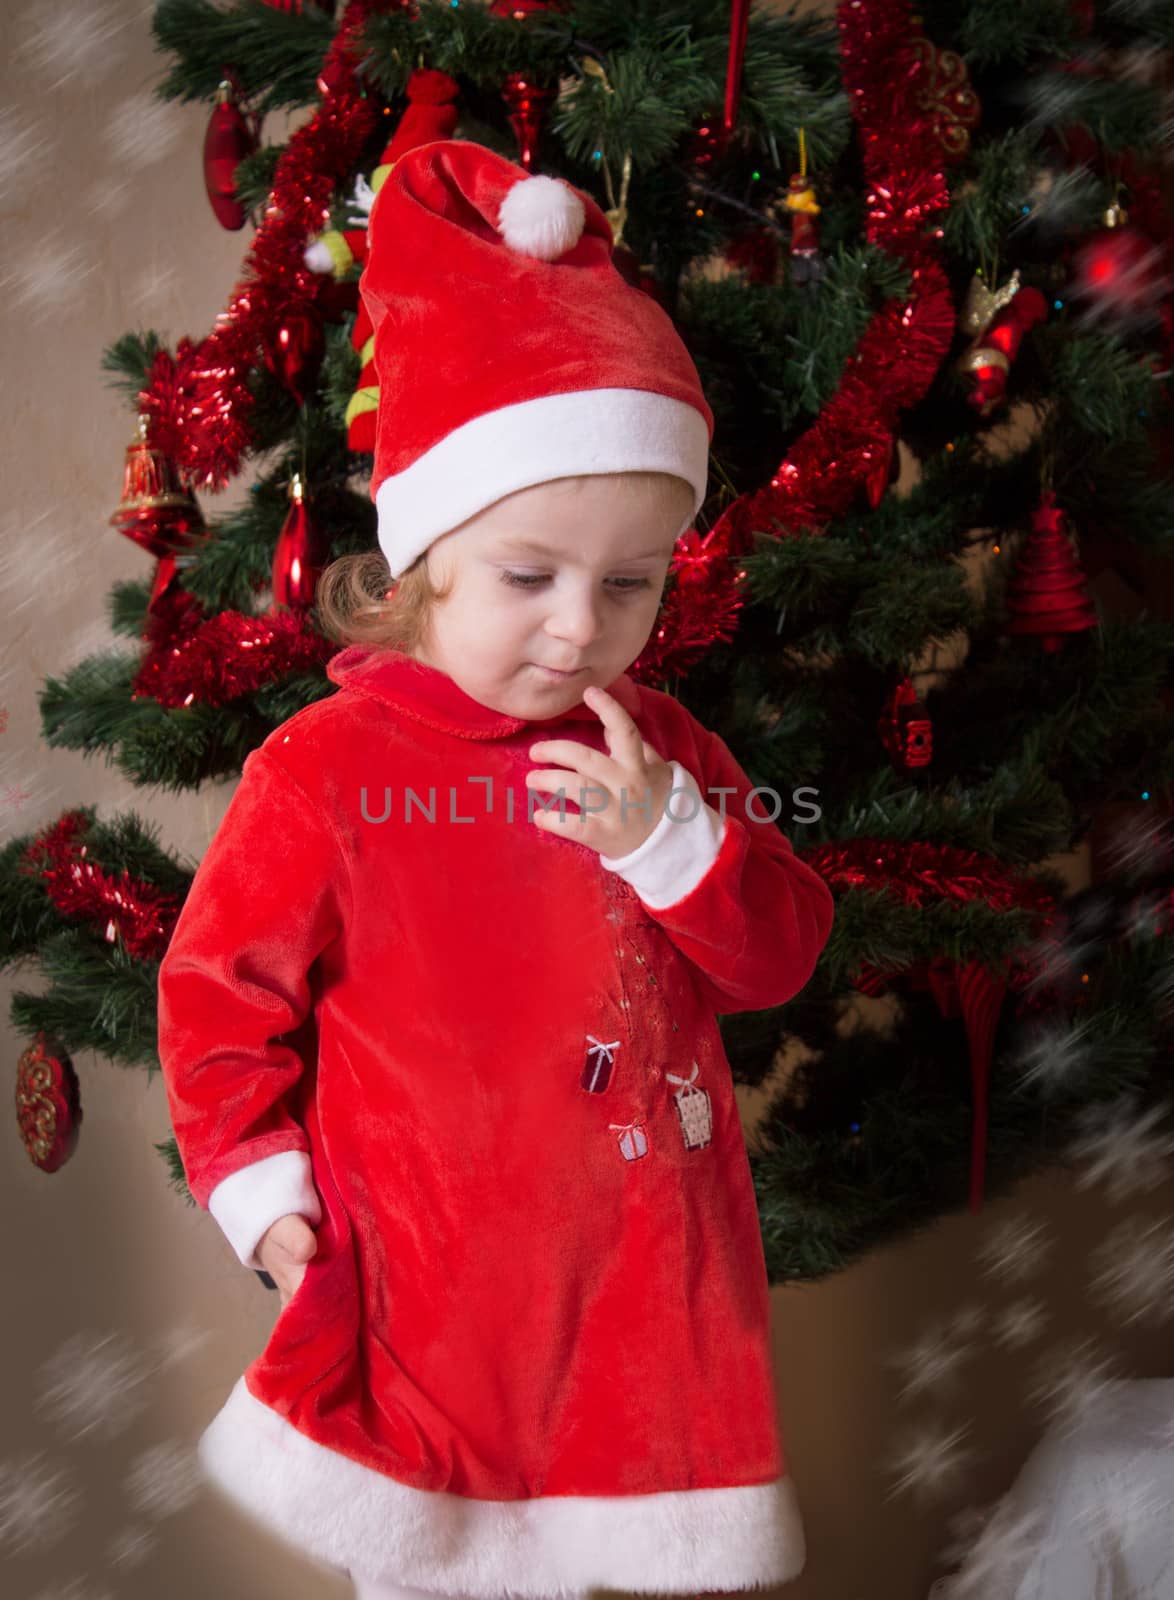 Adorable little girl putting wishes under Christmas tree